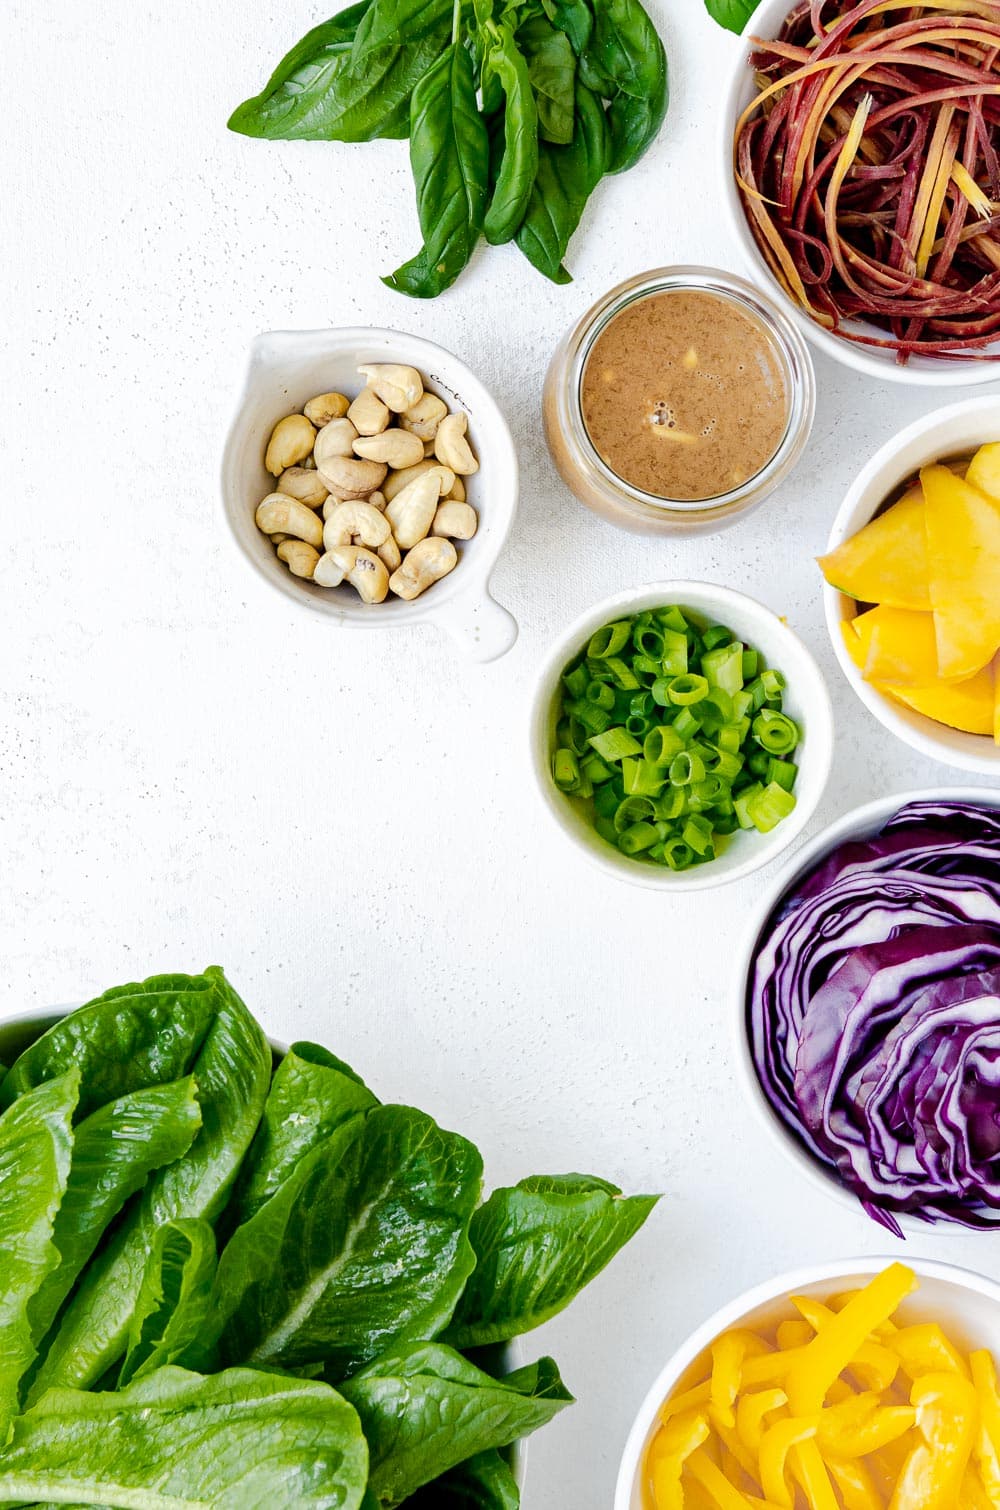 Thai salad ingredients - romaine lettuce, yellow bell pepper, red cabbage, green onions, peanut dressing, mango, carrots and cashews